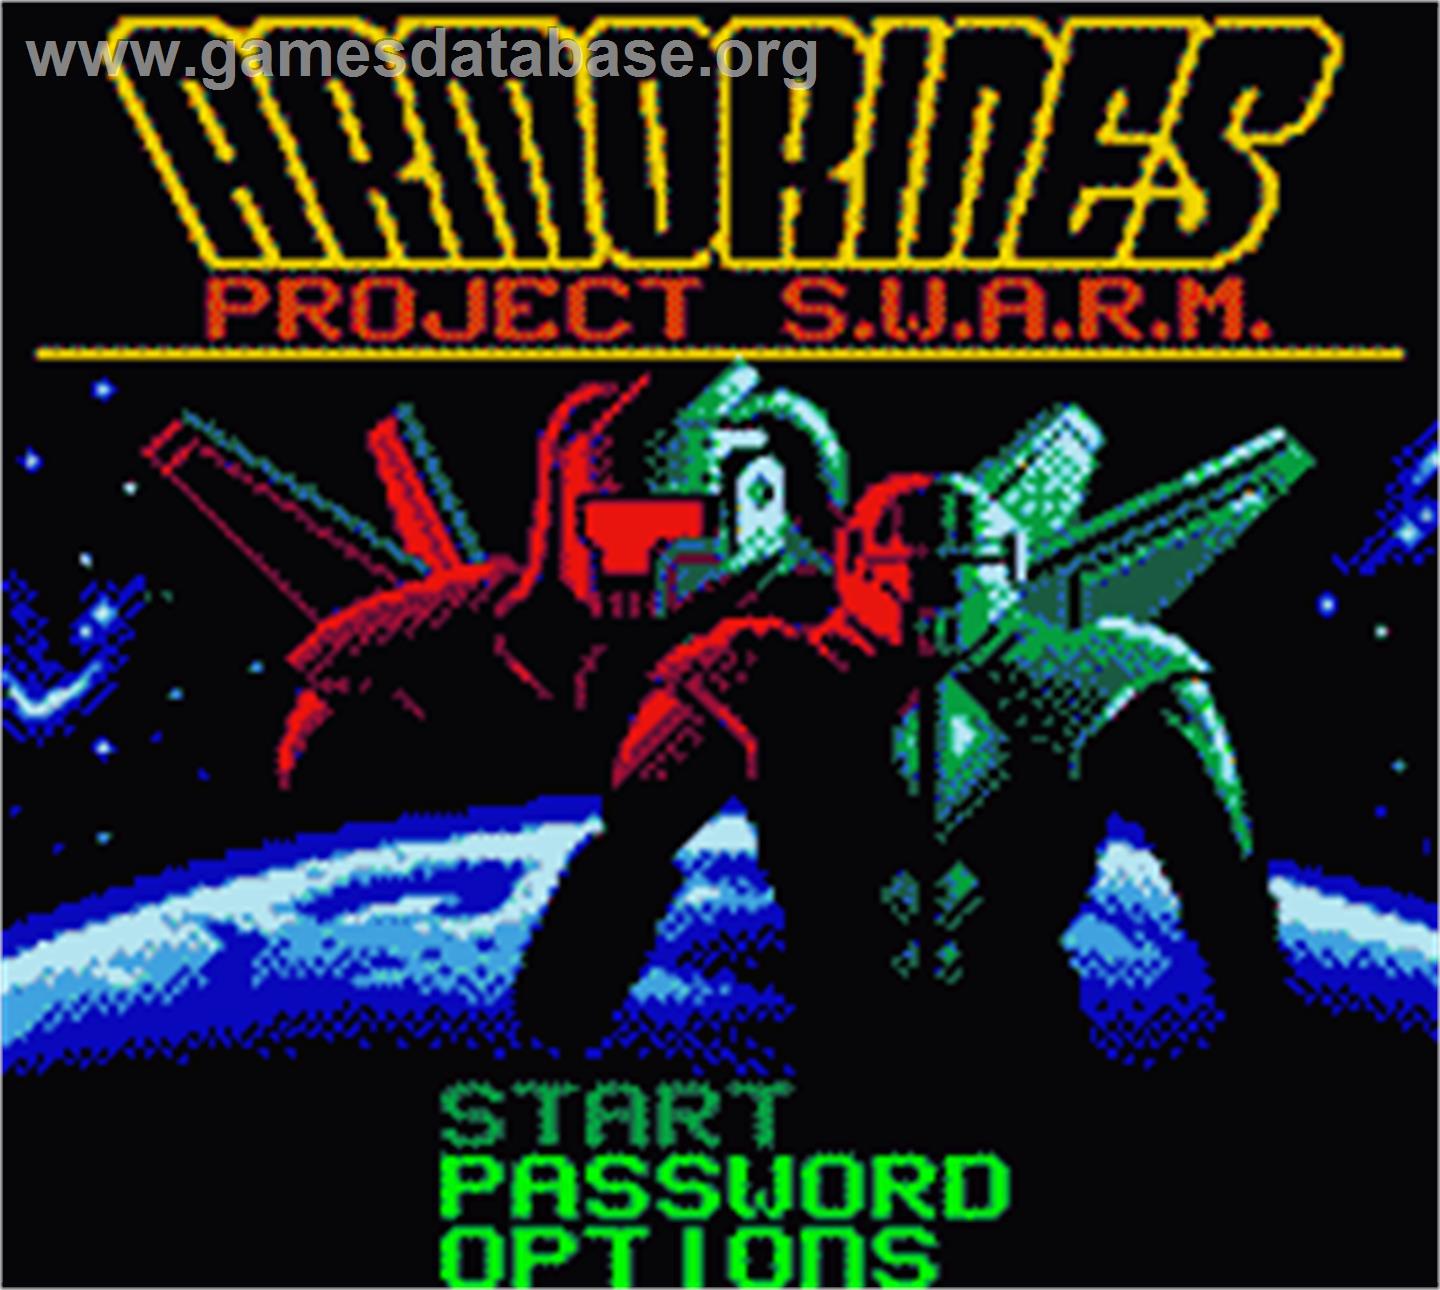 Armorines: Project S.W.A.R.M. - Nintendo Game Boy Color - Artwork - Title Screen